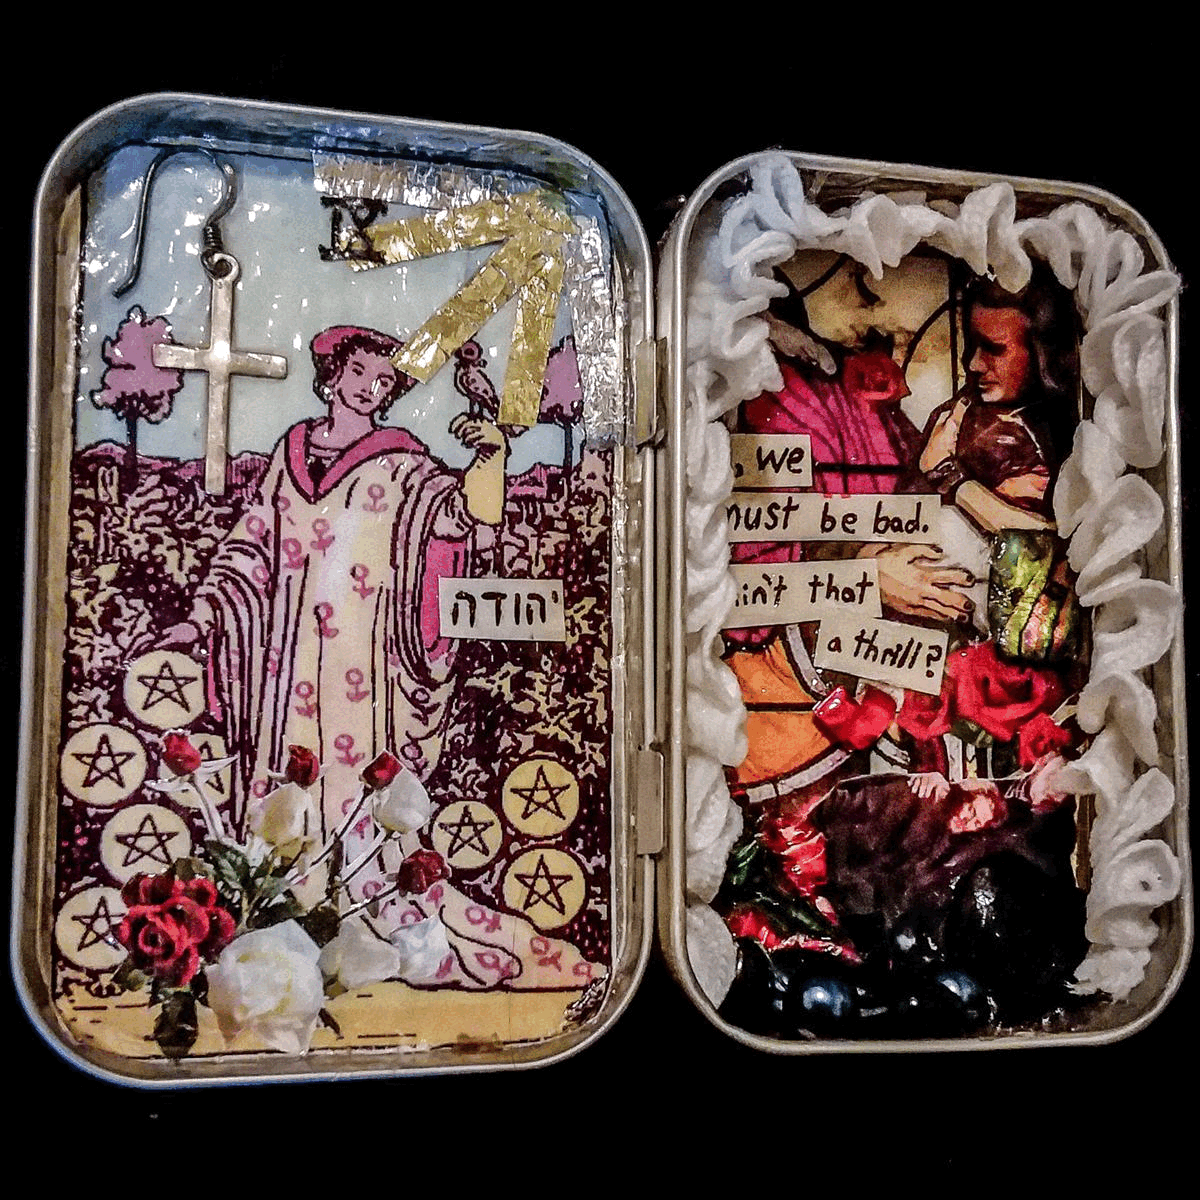 an altar inside an altoids tin. it has the Nine of Pentacles tarot card on one side, and a collage of images on the other depicting Judas Iscariot, and sometimes Jesus hugging him. There are also flowers, stones, and lace in the altar